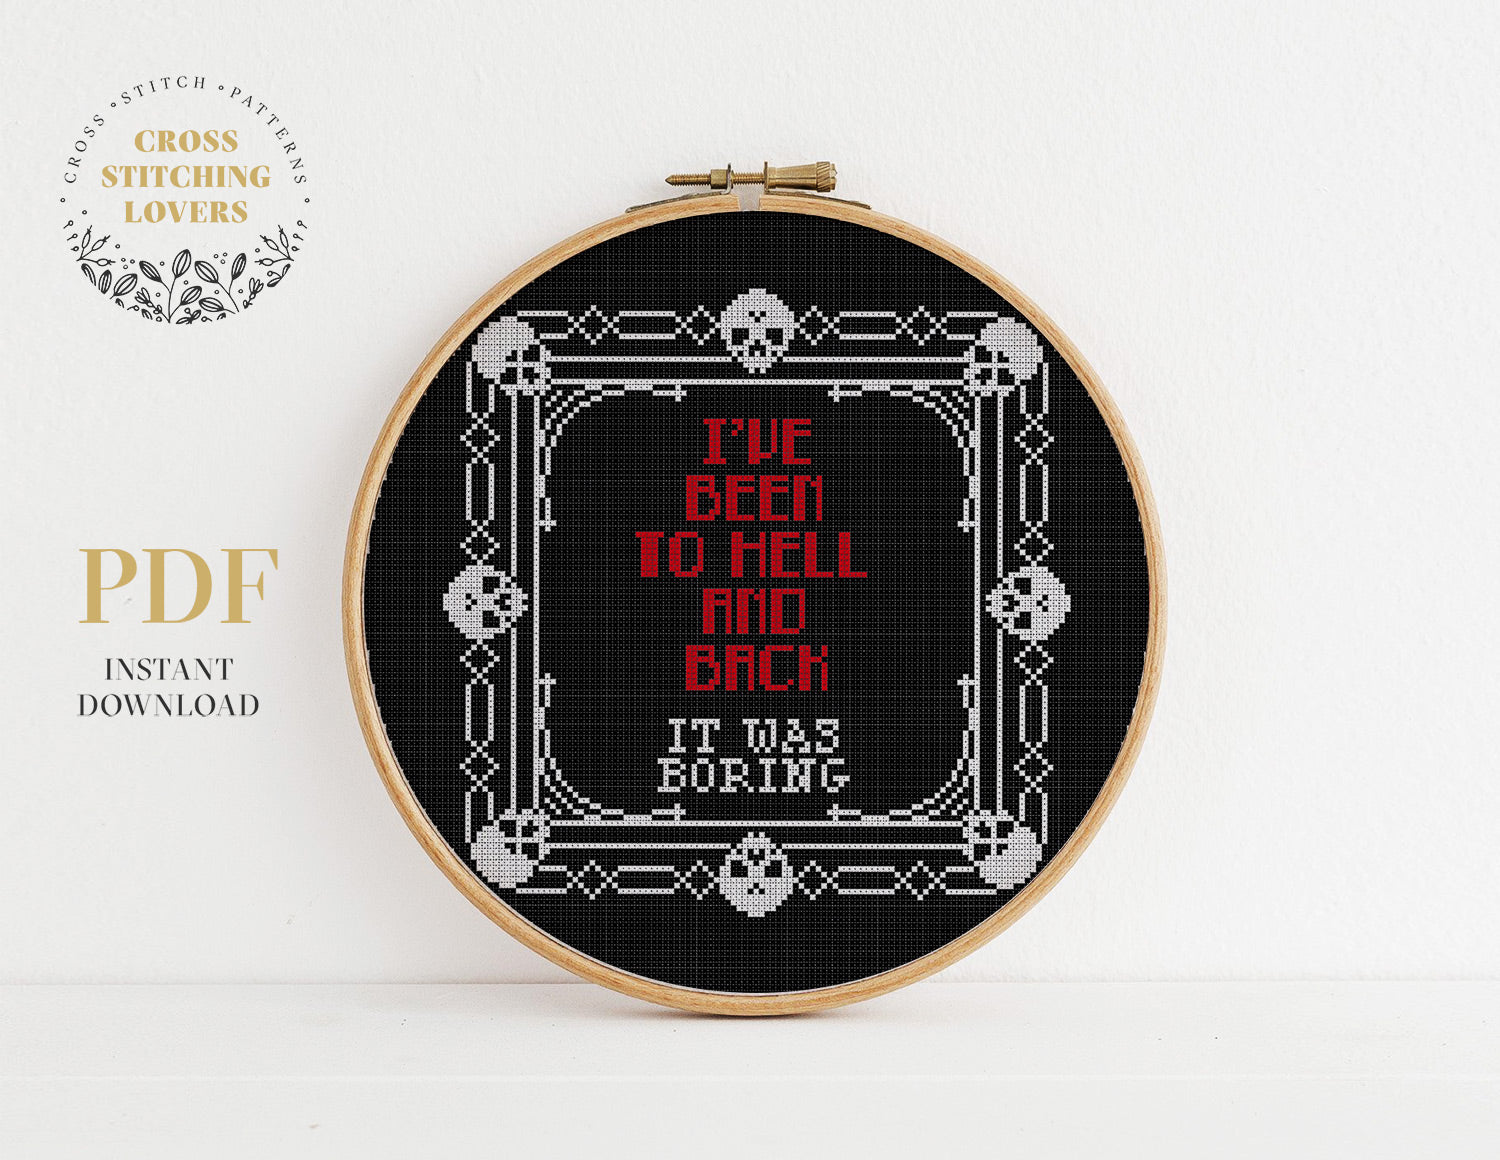 I've been to hell - Cross stitch pattern